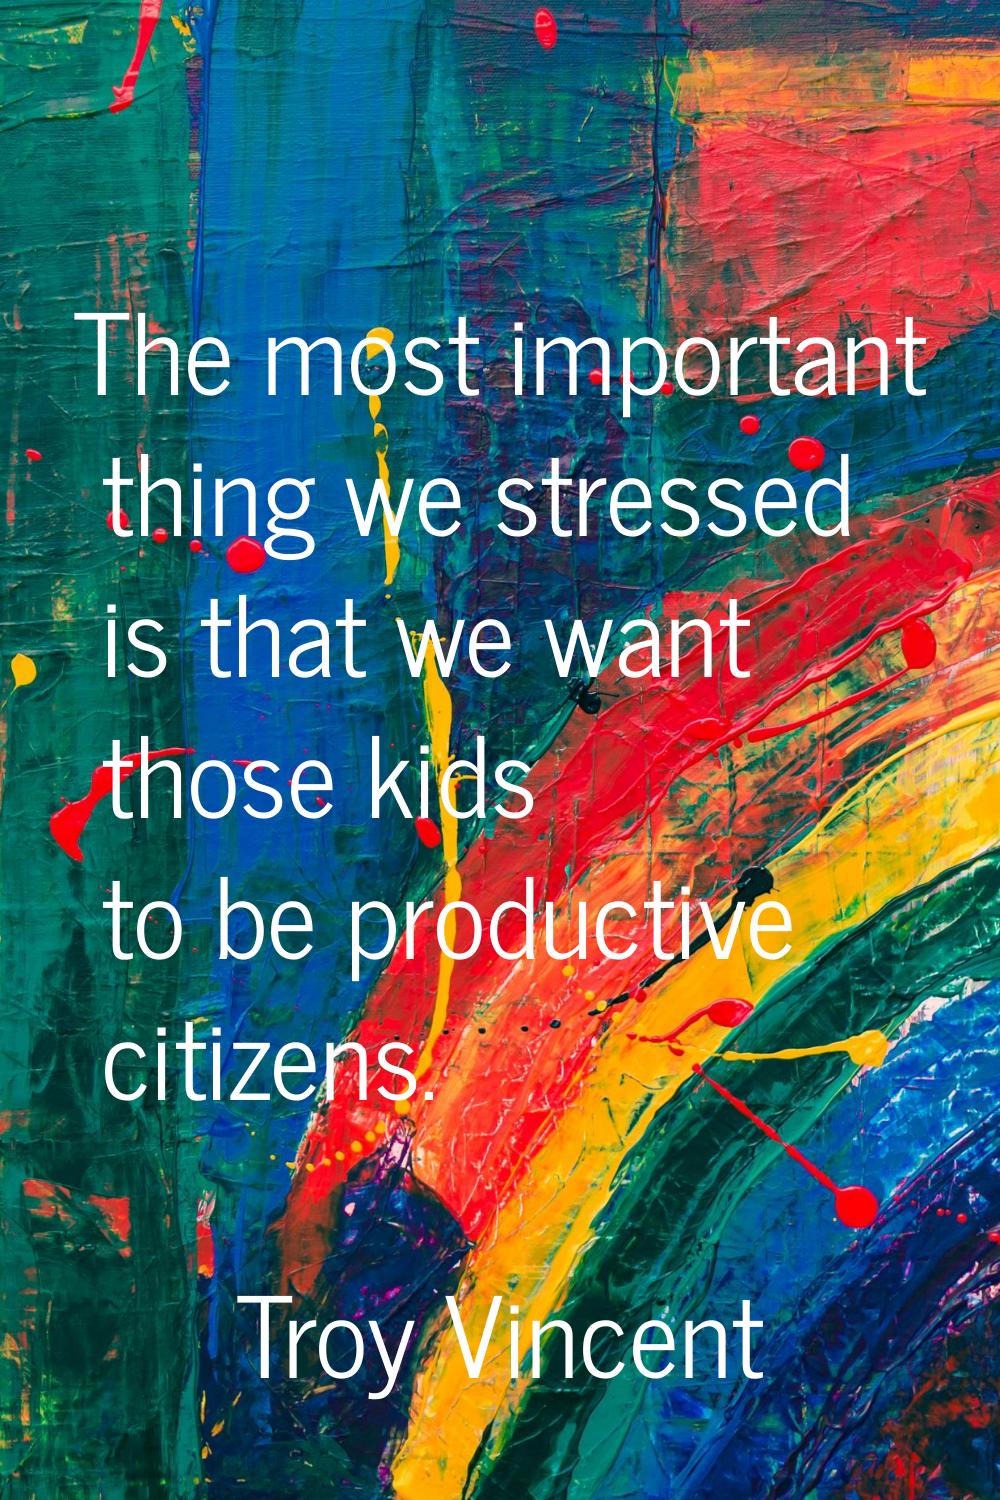 The most important thing we stressed is that we want those kids to be productive citizens.